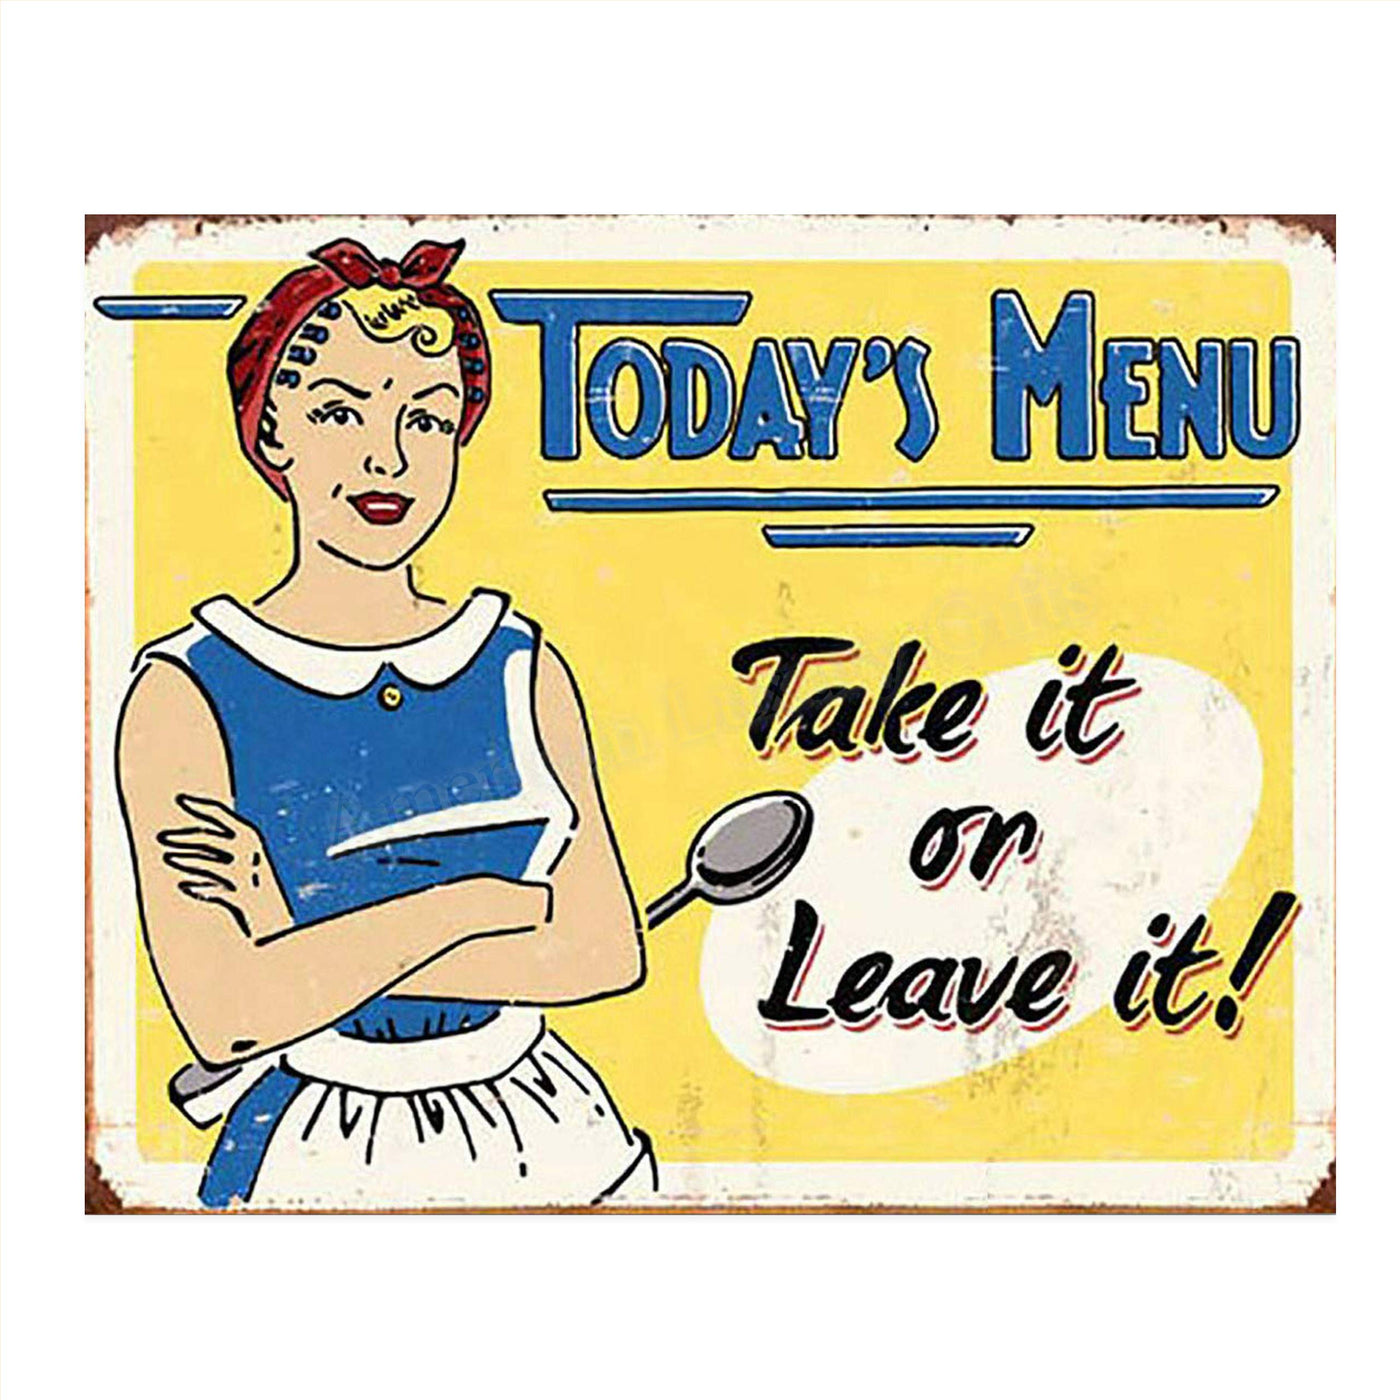 Rustic Sign-"Todays Menu-Take It or Leave It"-Funny Kitchen Sign-10 x 8" Retro Print Wall Art. Distressed Sign Replica-Ready to Frame. Home & Kitchen D?cor. Perfect For Bar-Restaurants. Listen to Mom!